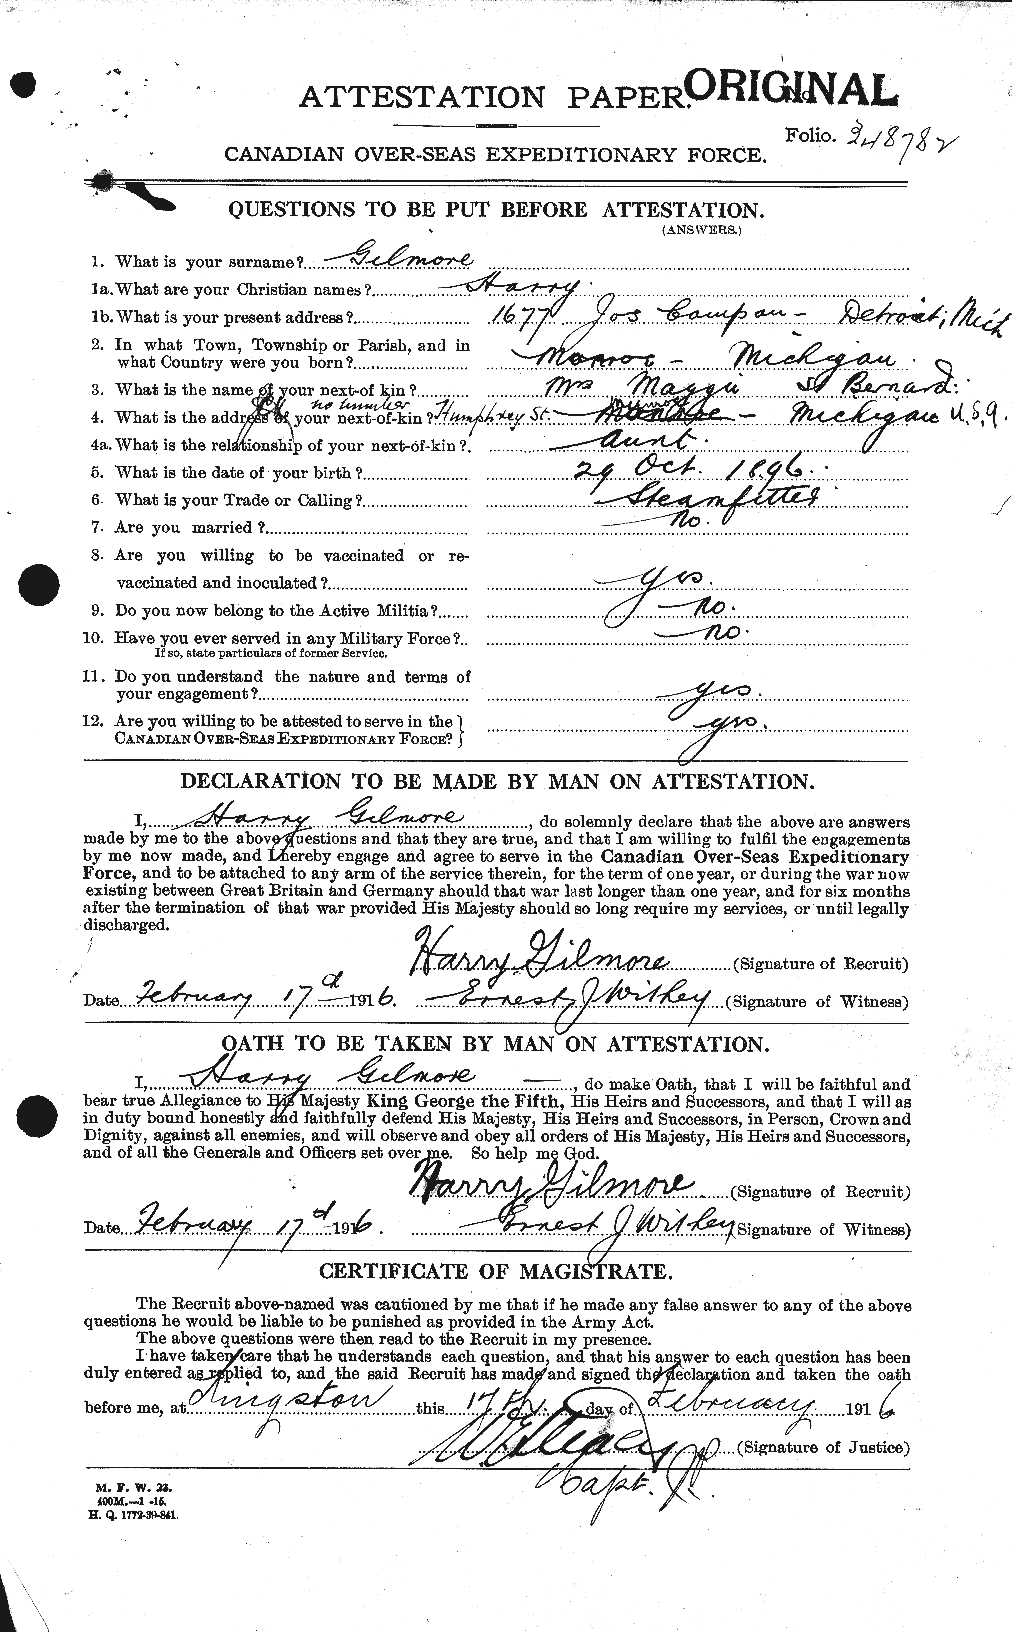 Personnel Records of the First World War - CEF 350851a